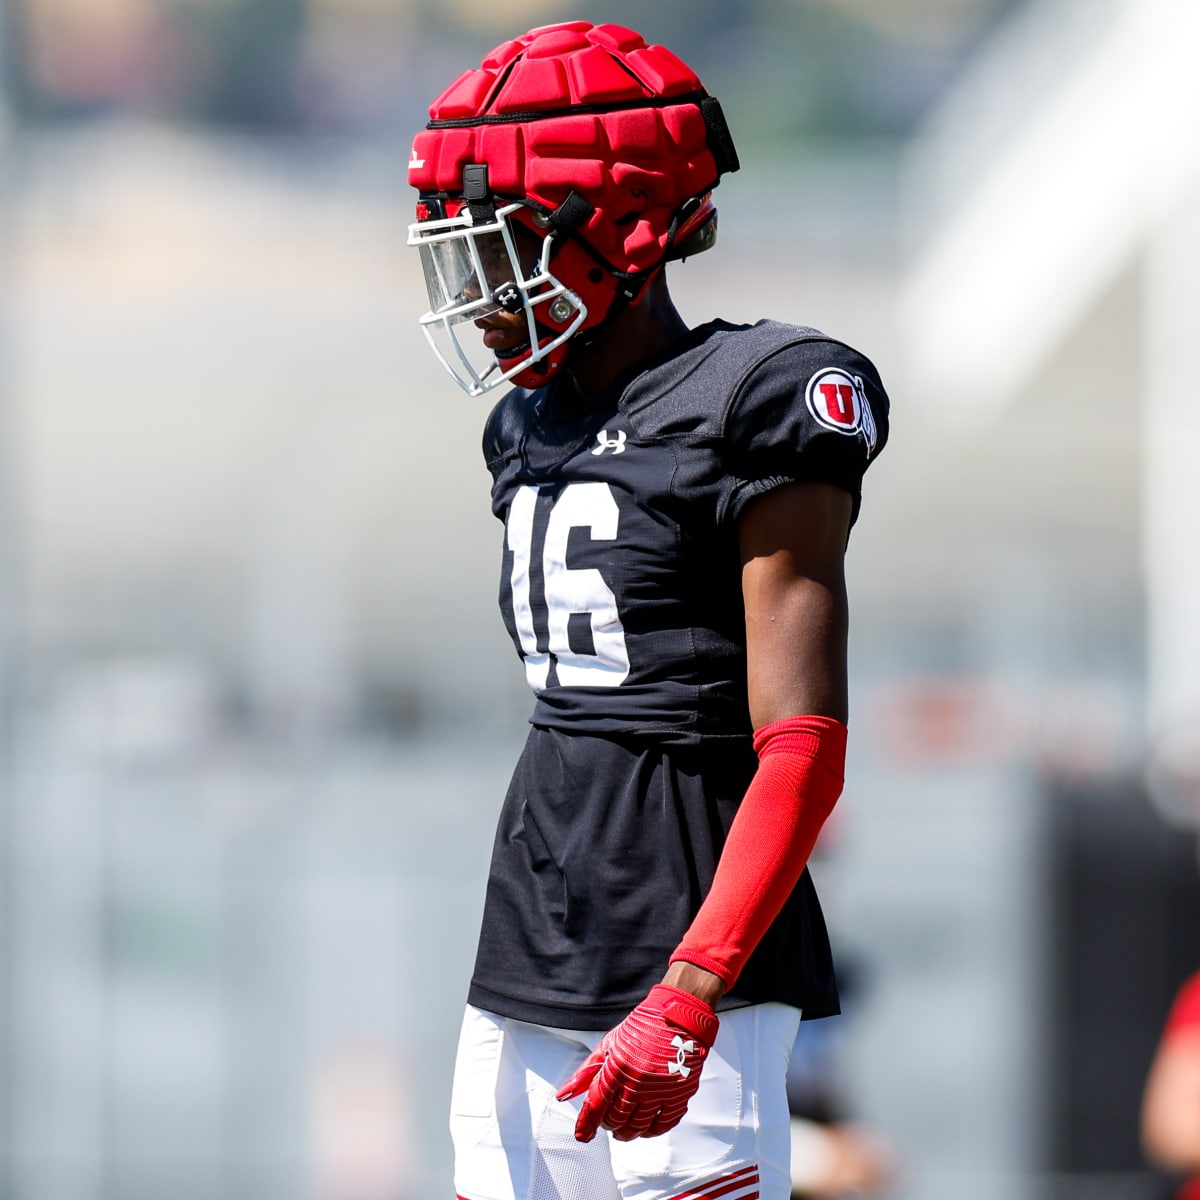 #UtahCFBStats On Saturday night, the Utah Secondary was tested by the U$C receivers. Zemaiah Vaughn played all 39 of his snaps in coverage, had 2 PBUs, and lead the Utes with a PFF Coverage Grade of 77.9! Pretty good for a walk-on who's only a sophomore! 🙌 @VaughnZemaiah